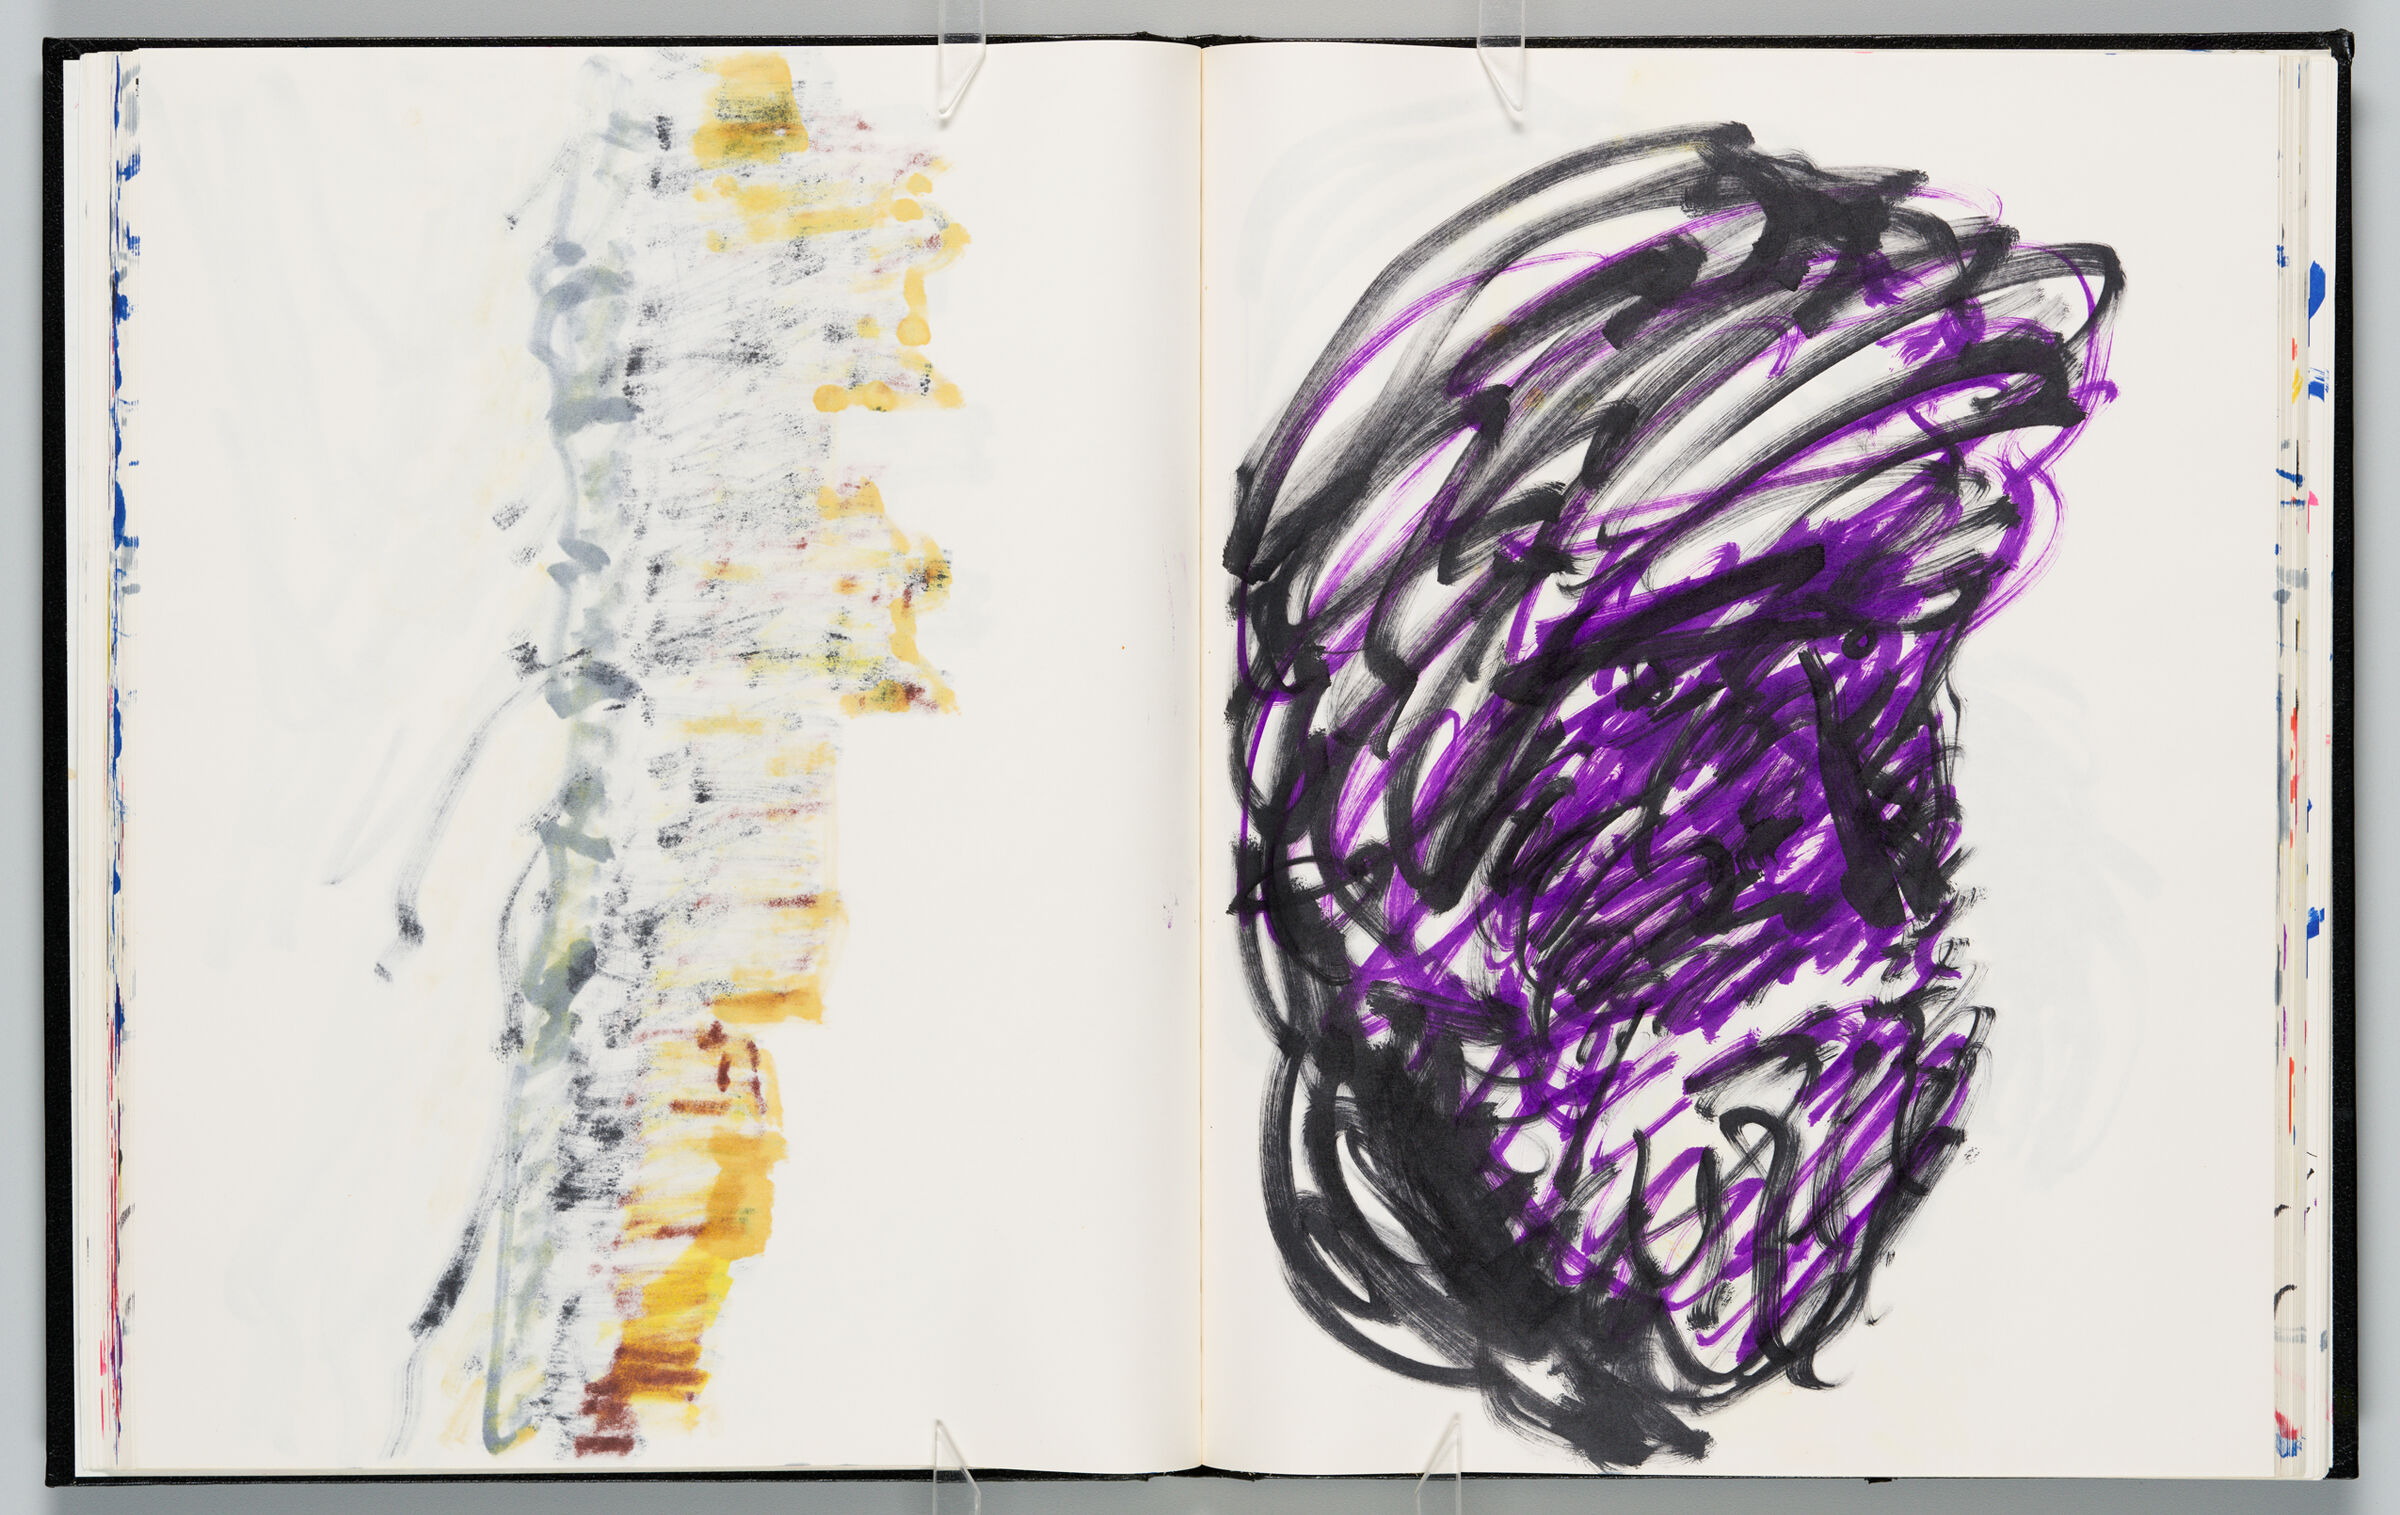 Untitled (Bleed-Through Of Previous Page, Left Page); Untitled (Study Of Male Figure With Head Covering, Right Page)